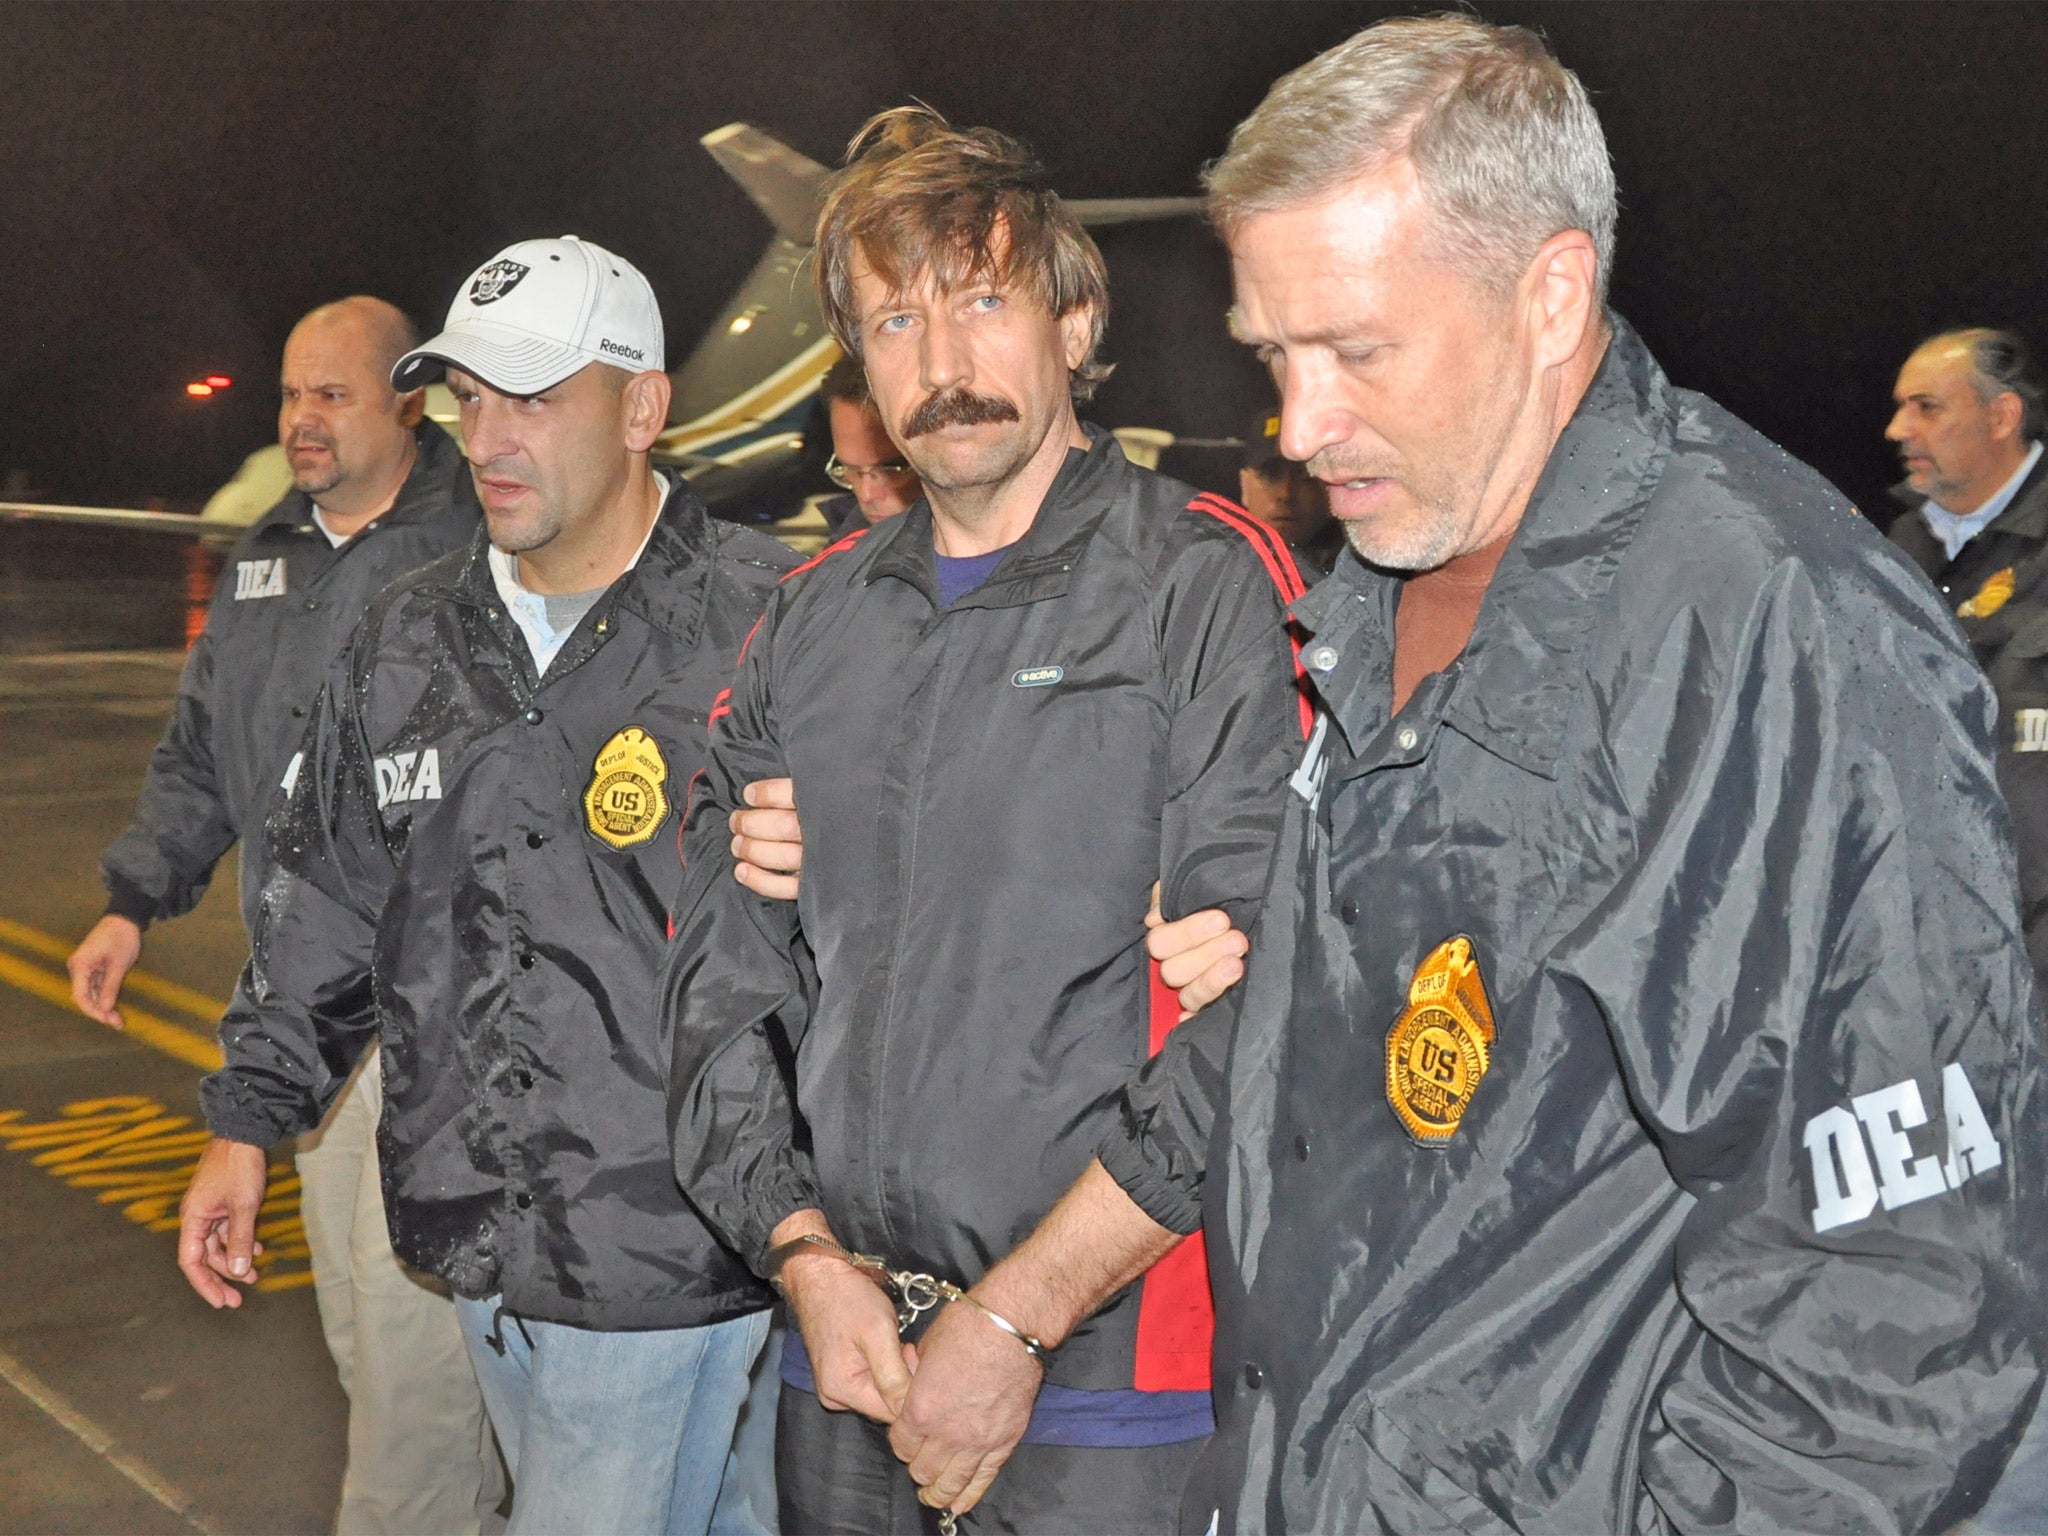 Suspected arms dealer, Viktor Bout, is arrested after a sting in Thailand in 2010